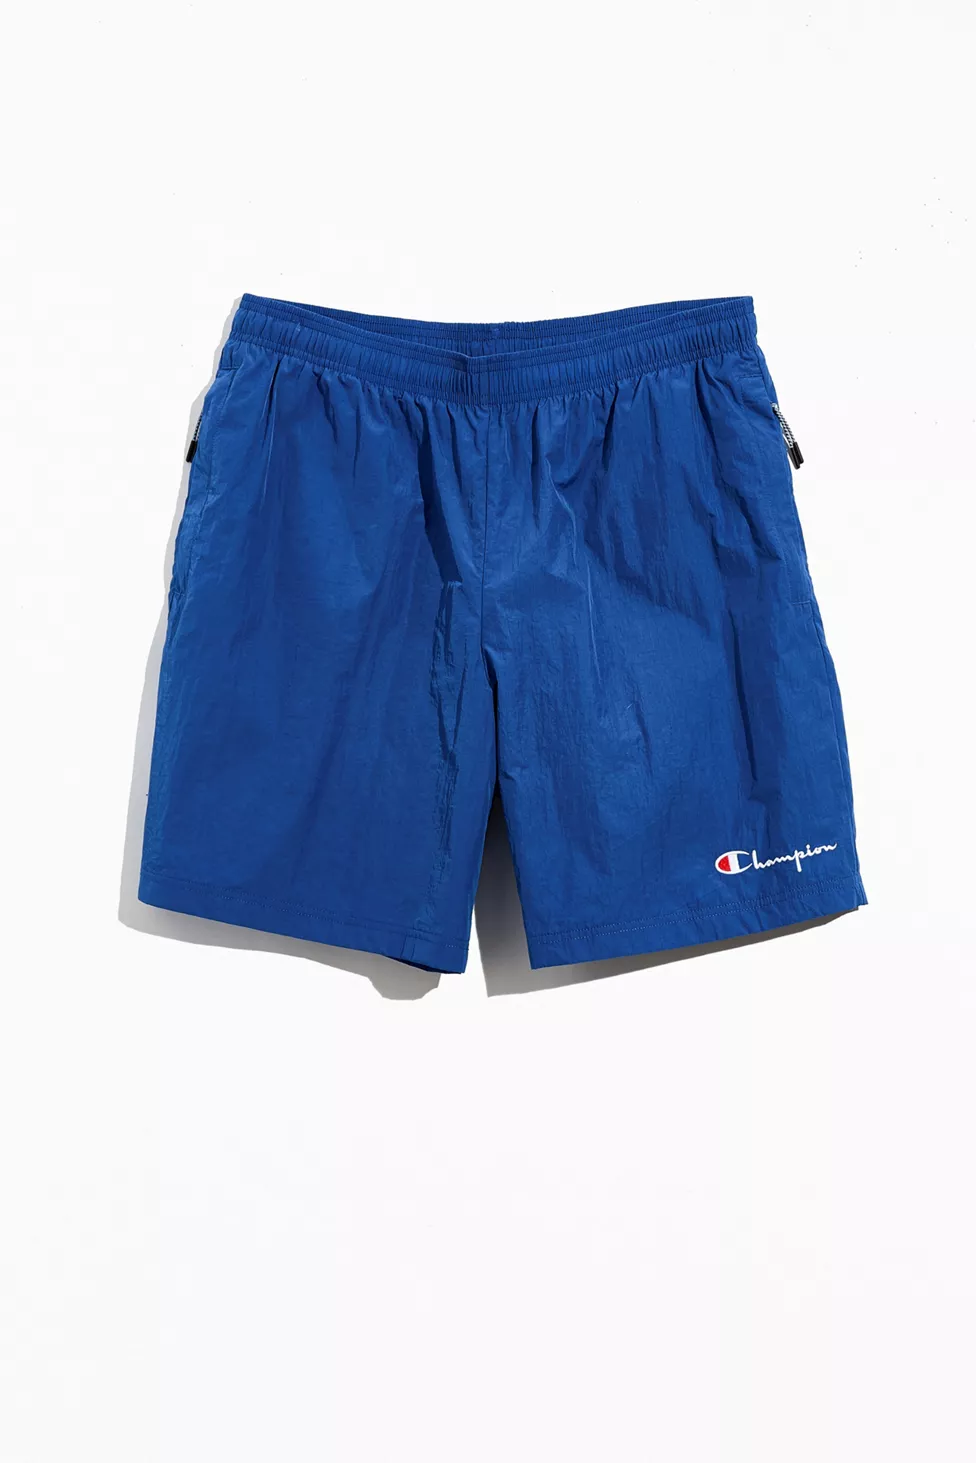 45% OFF the Champion Nylon Crinkle Shorts (UO Exclusive) — Sneaker Shouts